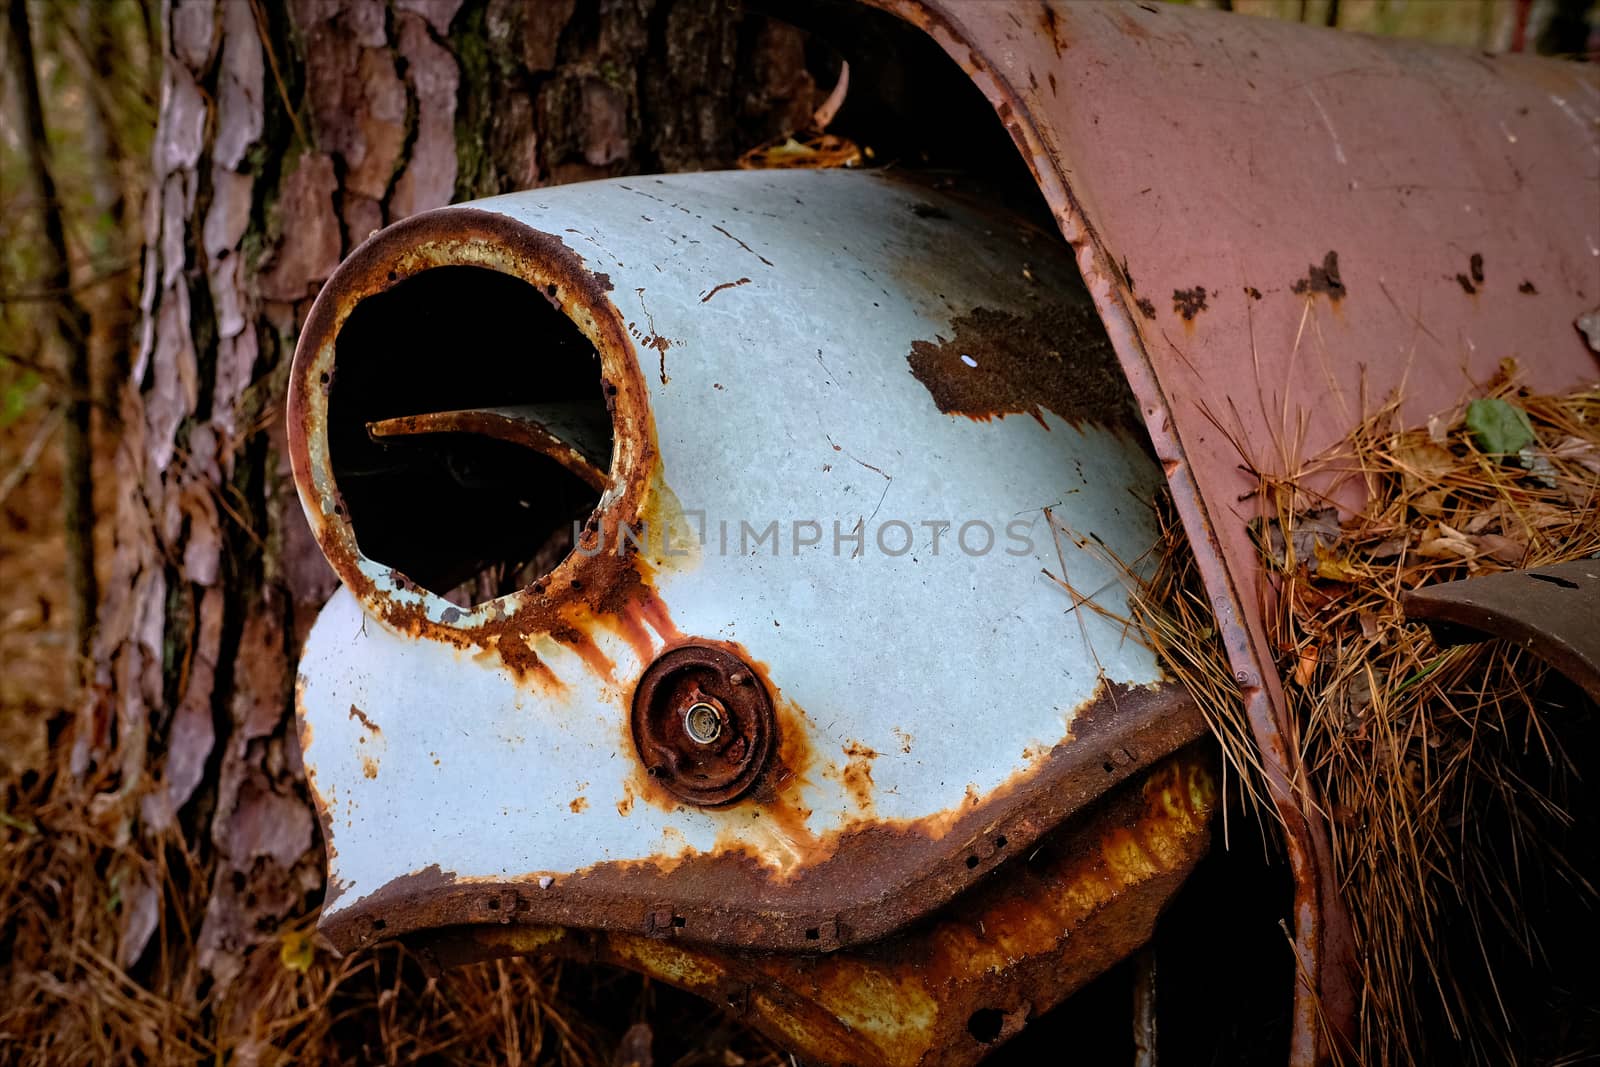 Fender and Tail LIght into Tree in an old junkyard